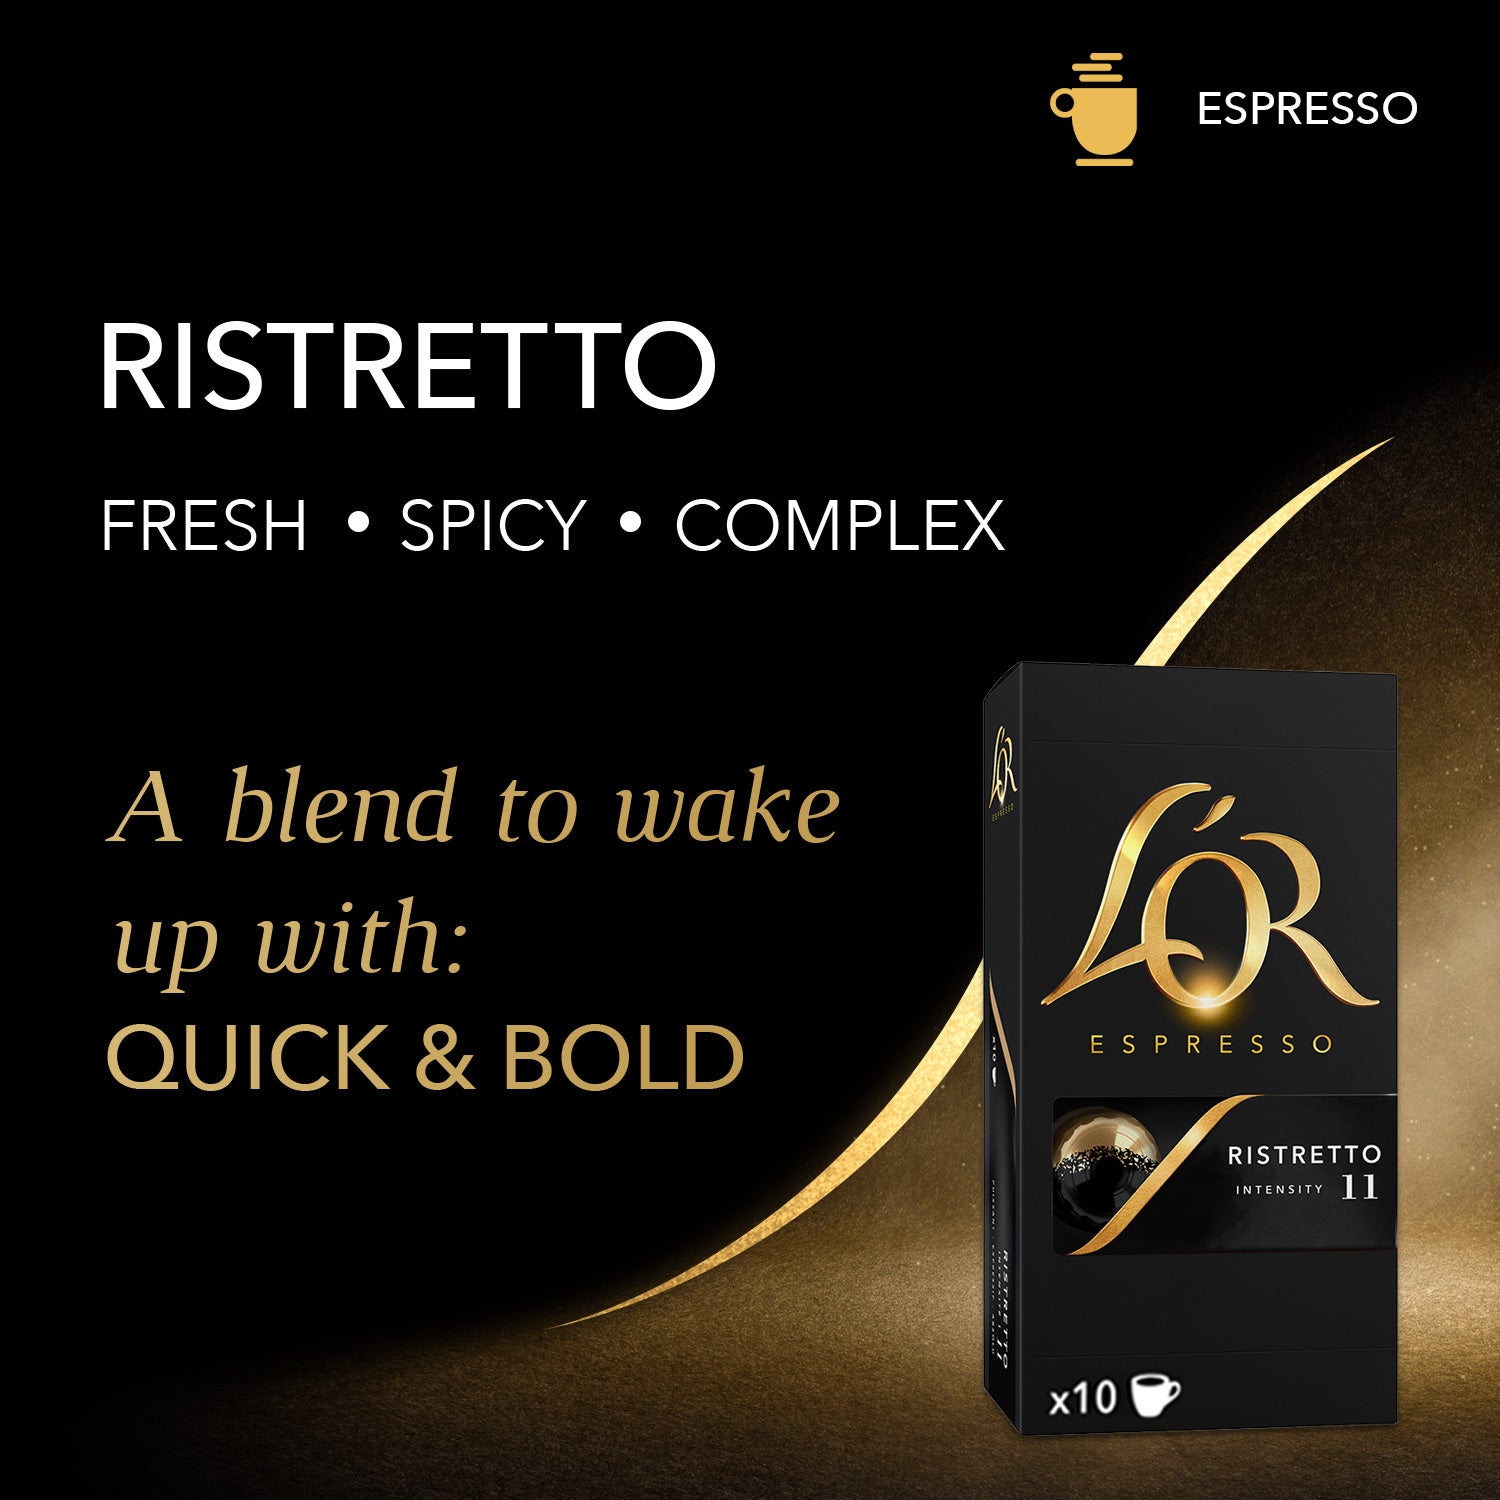 A blend to wake up with, quick and bold.